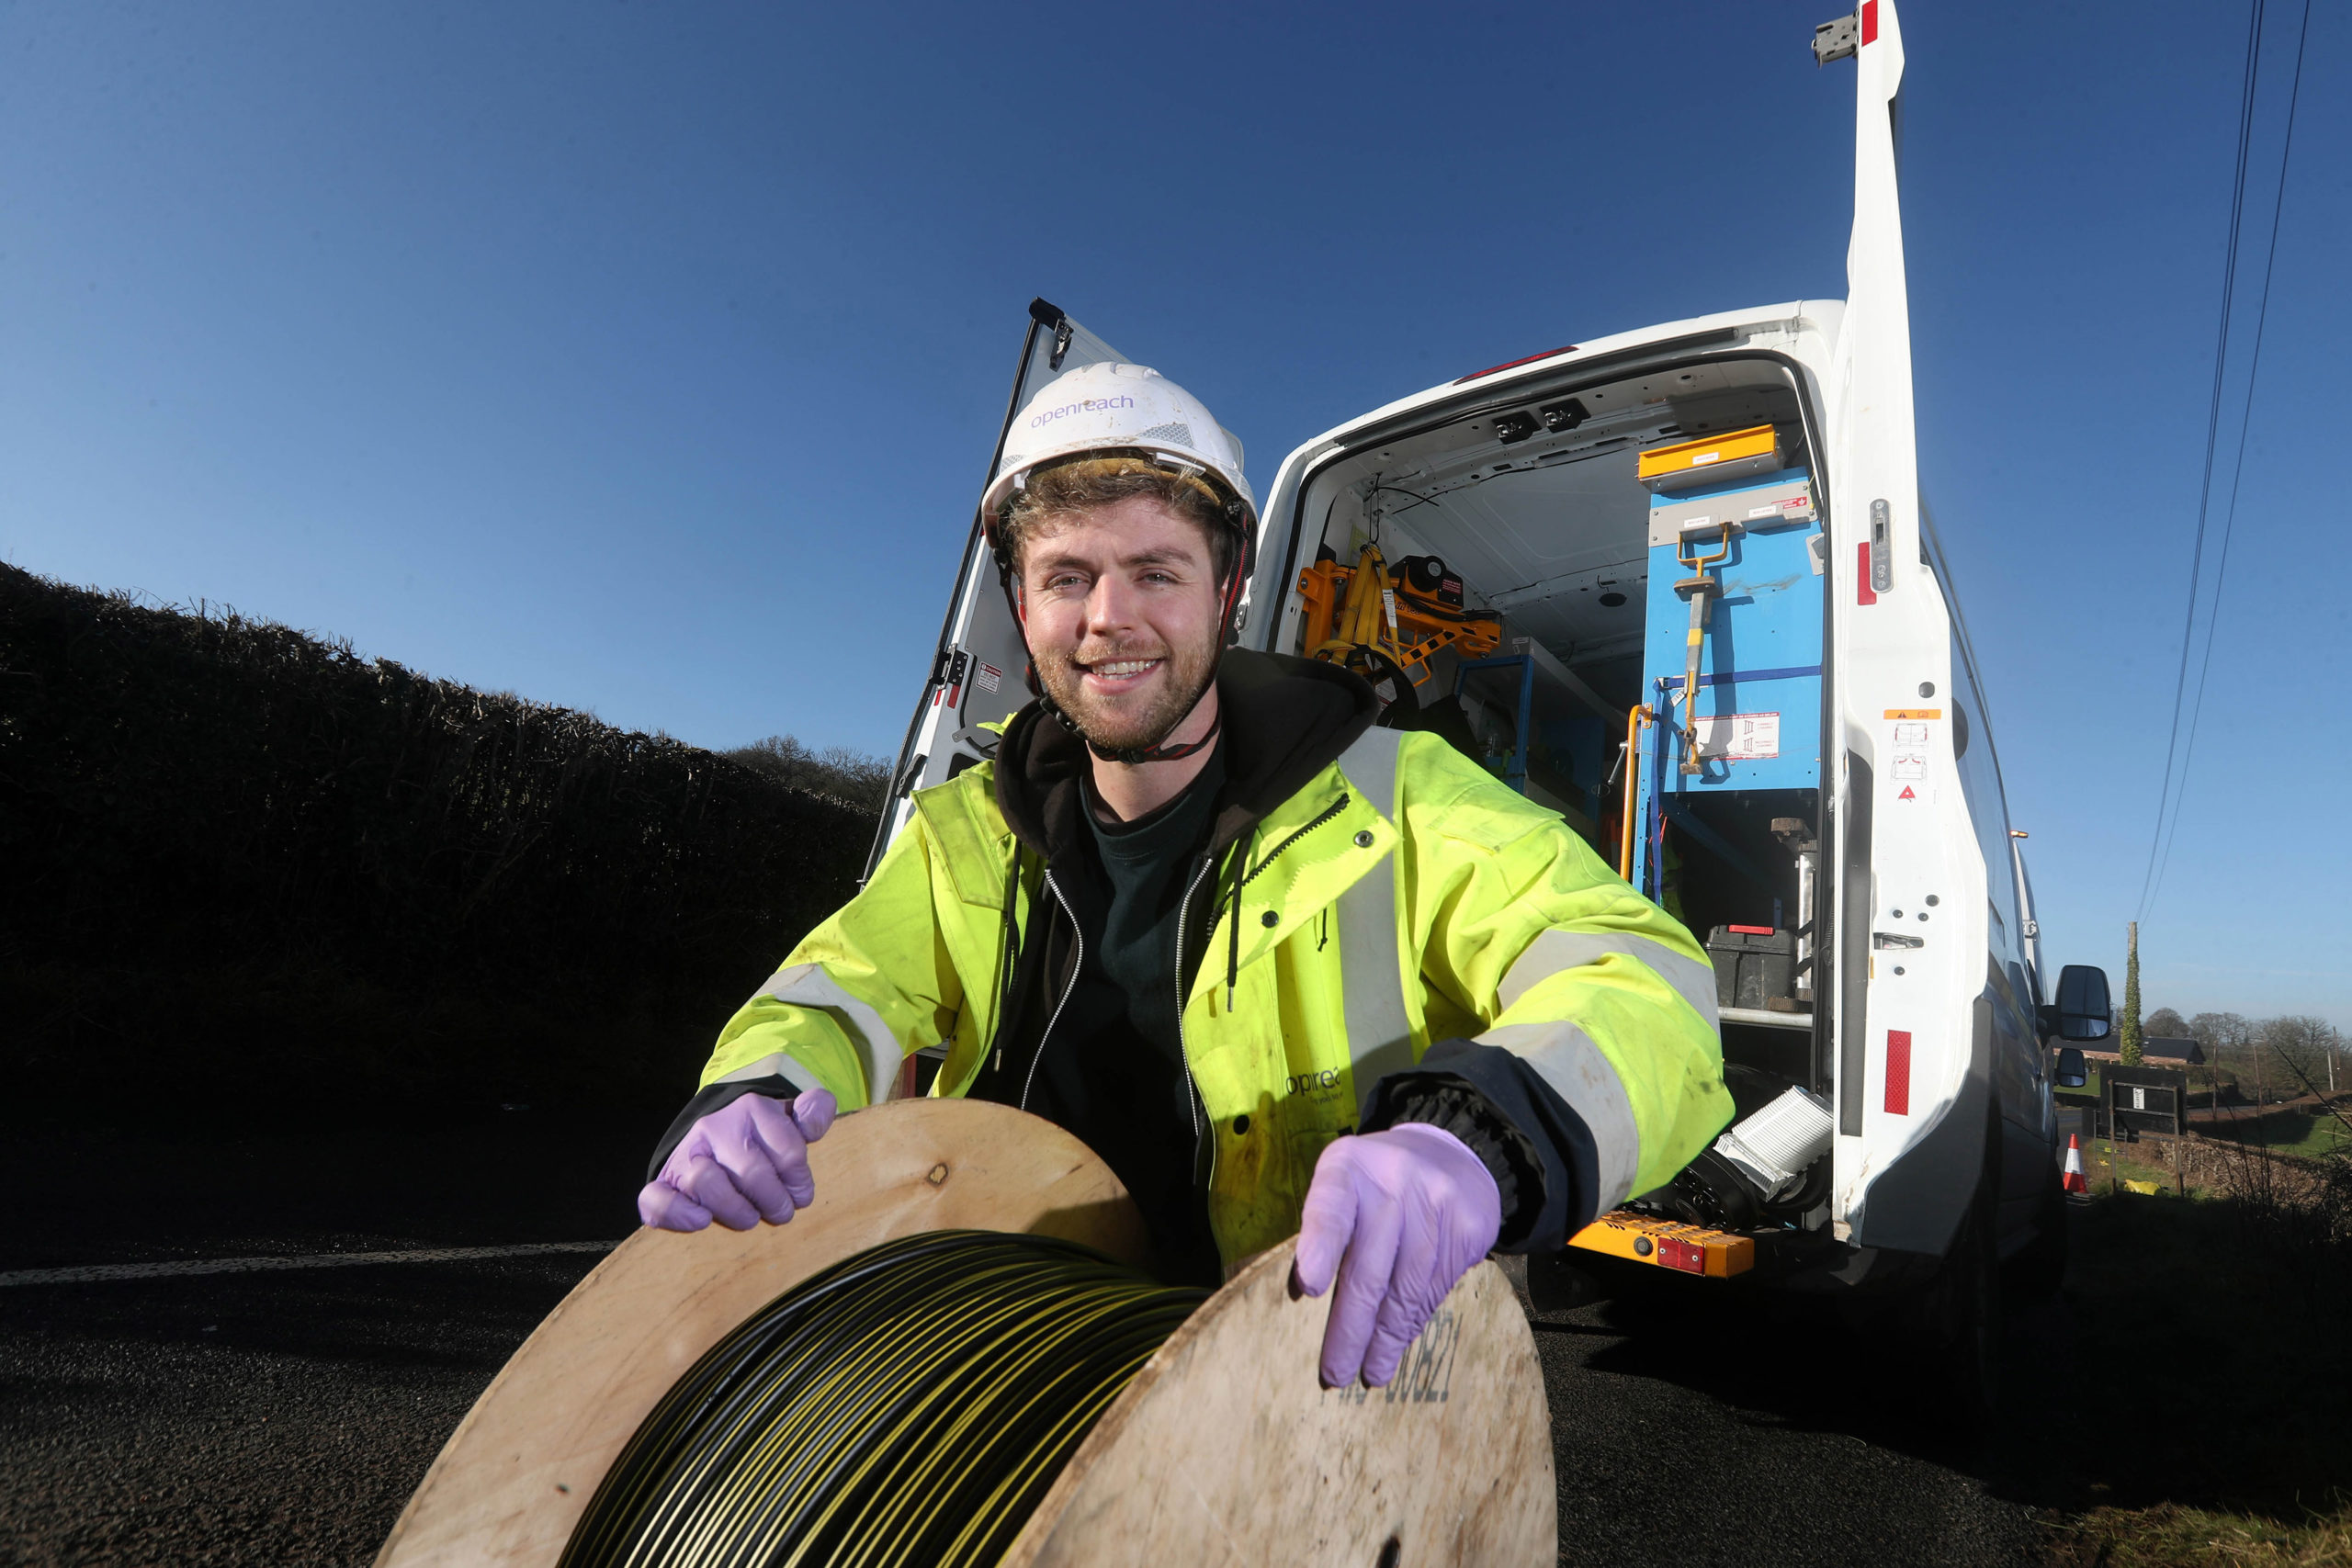 Career with Openreach